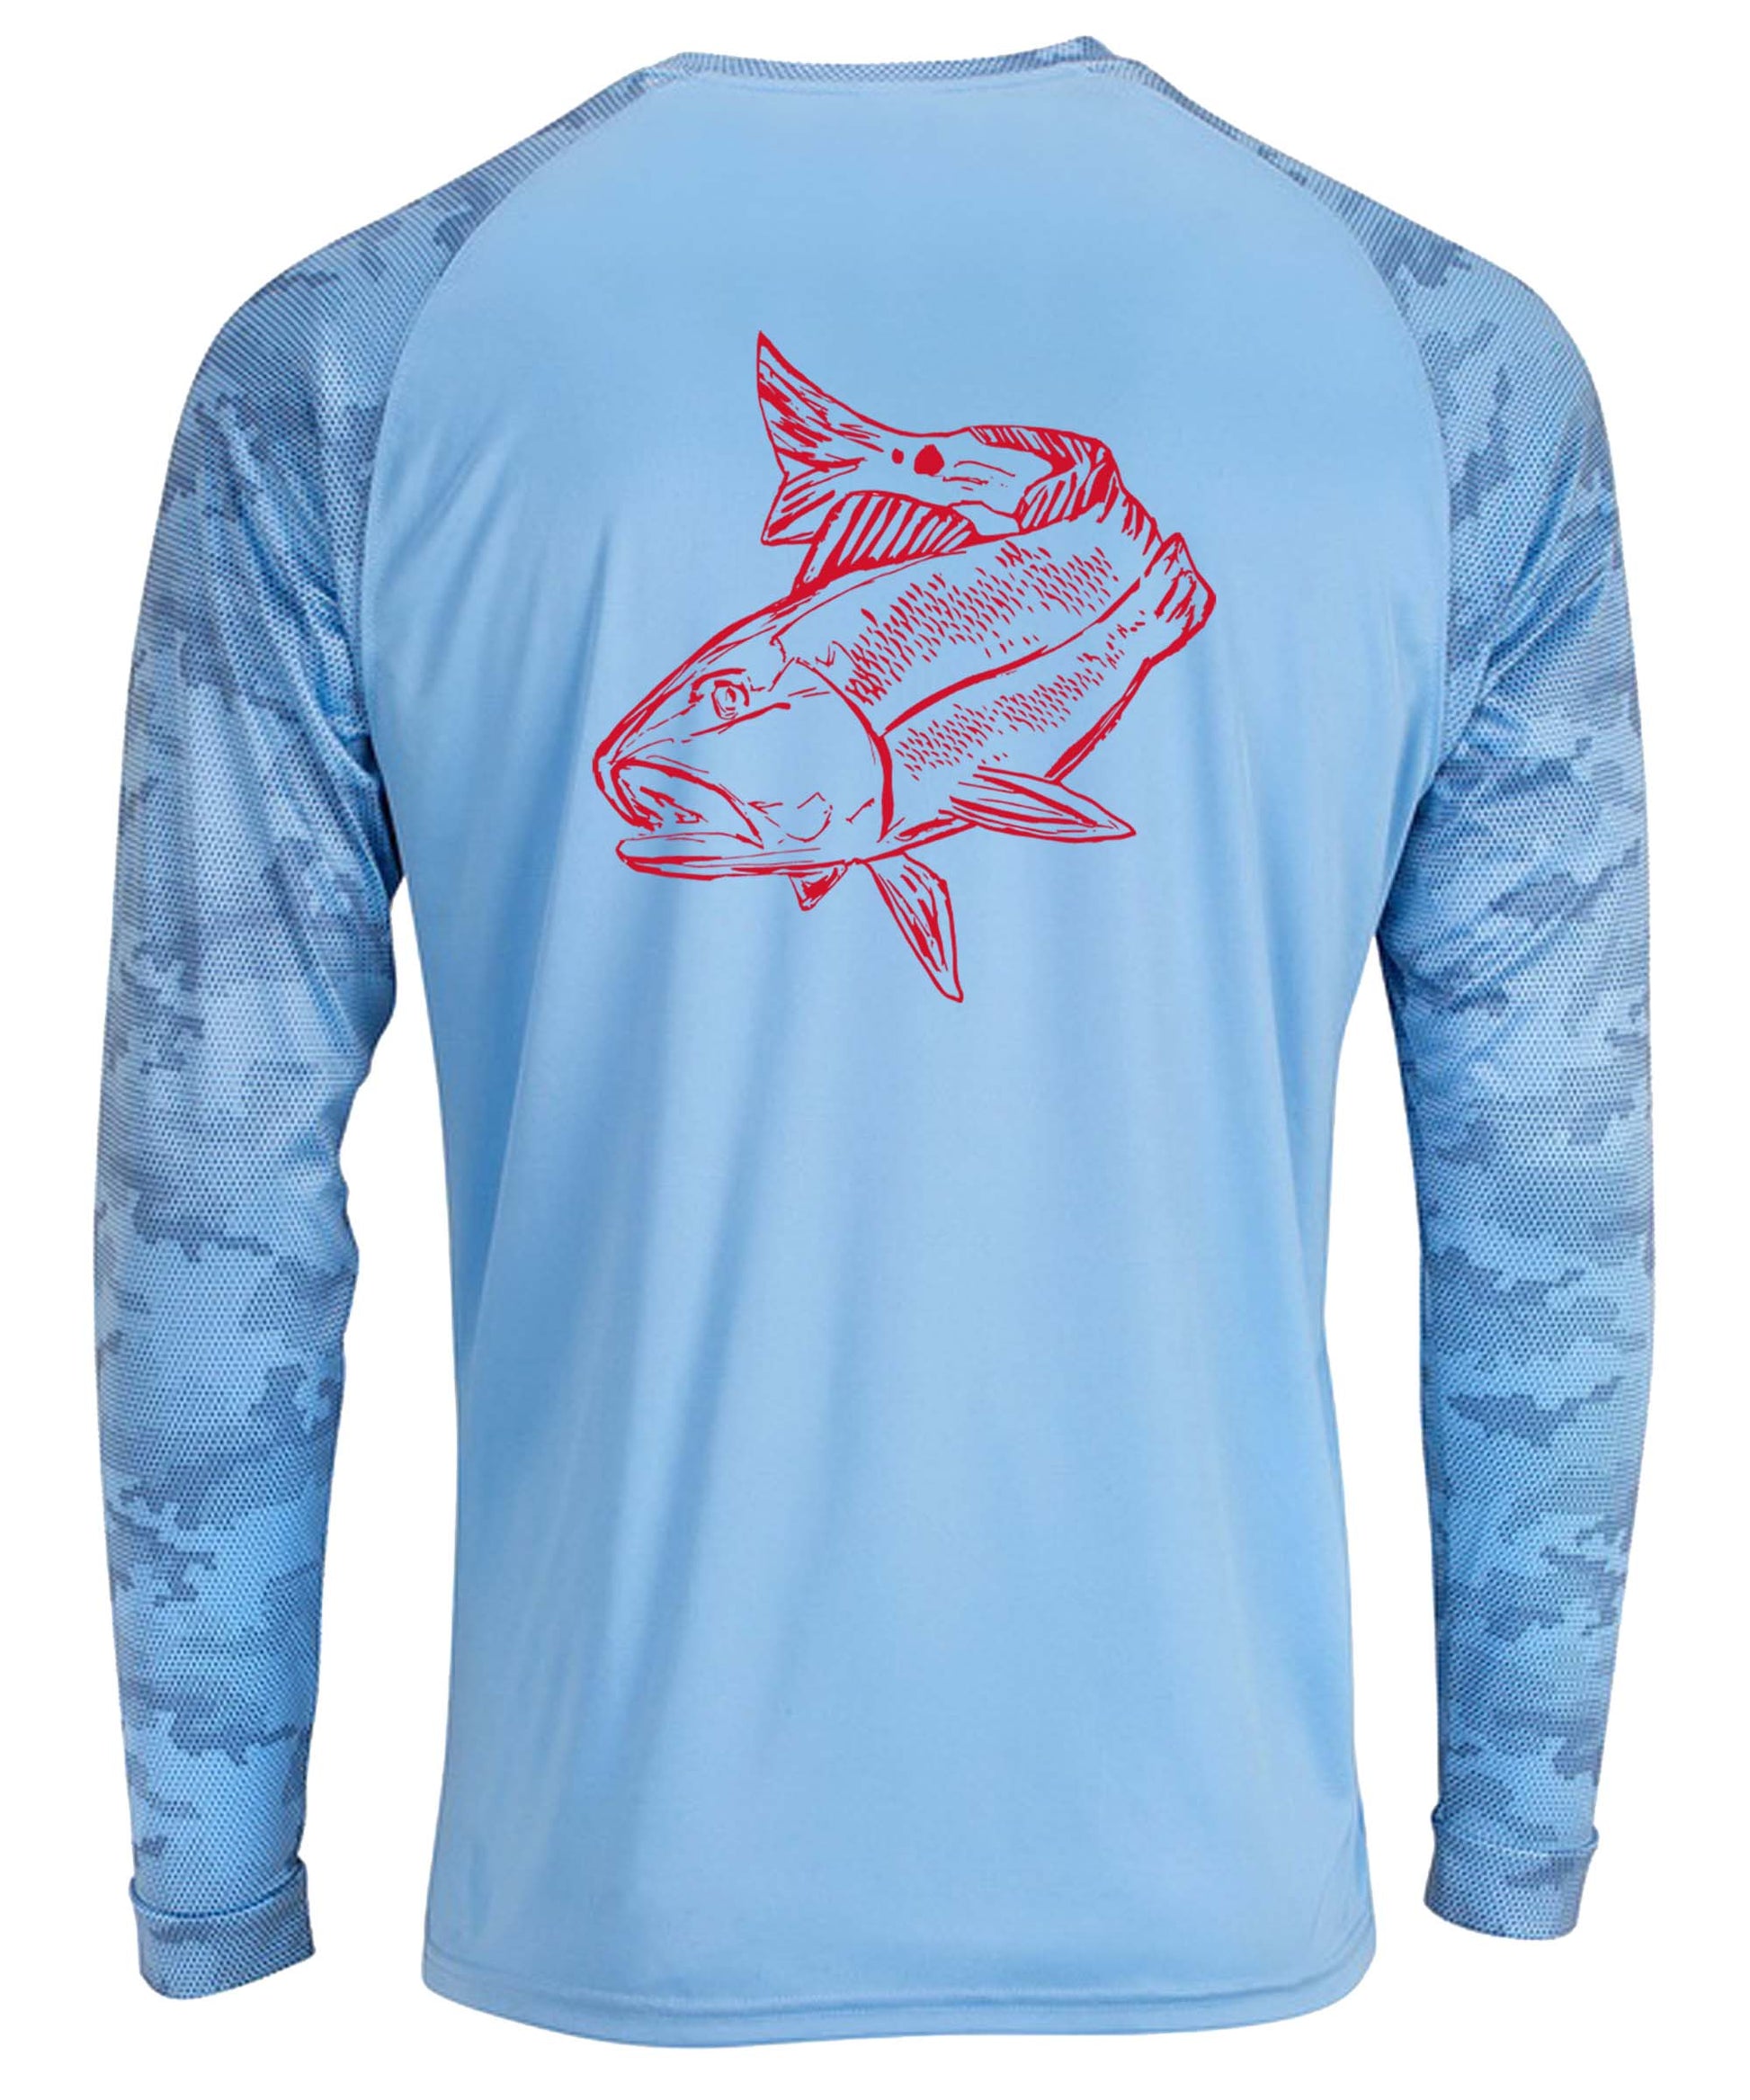 Redfish Performance Dry-Fit Fishing shirts with Sun Protection - Blue Mist Digital Camo Long Sleeve